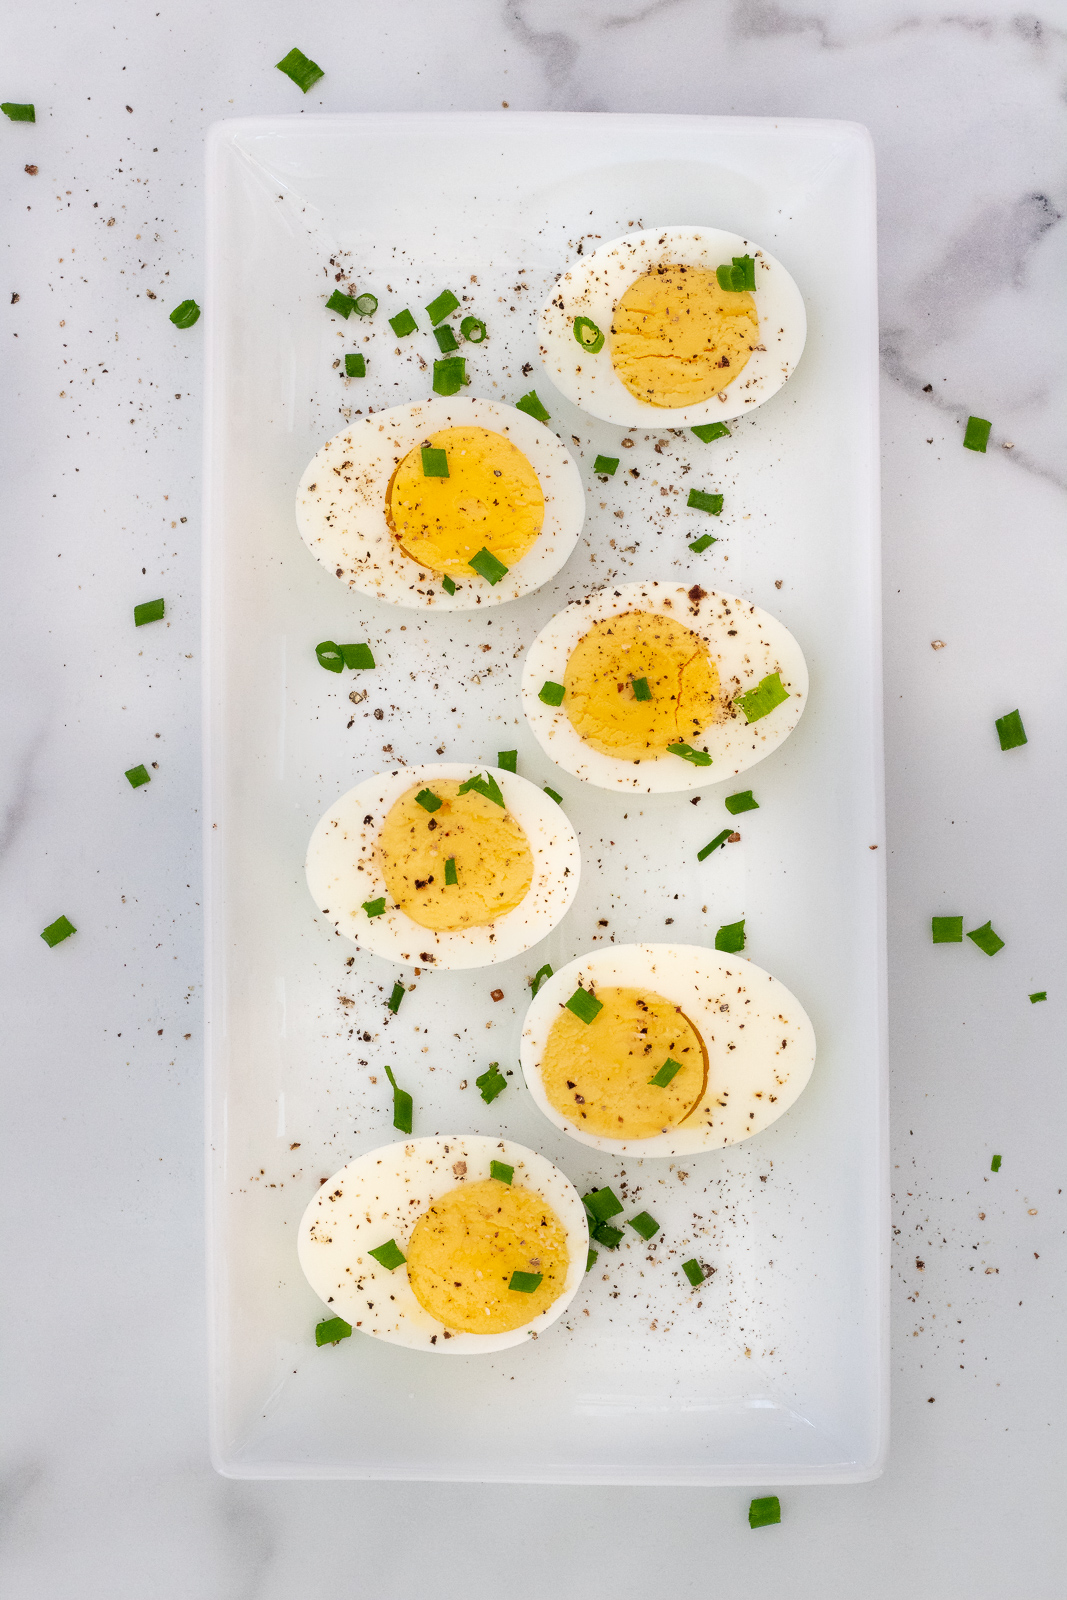 How to make perfect hard boiled eggs the easy way